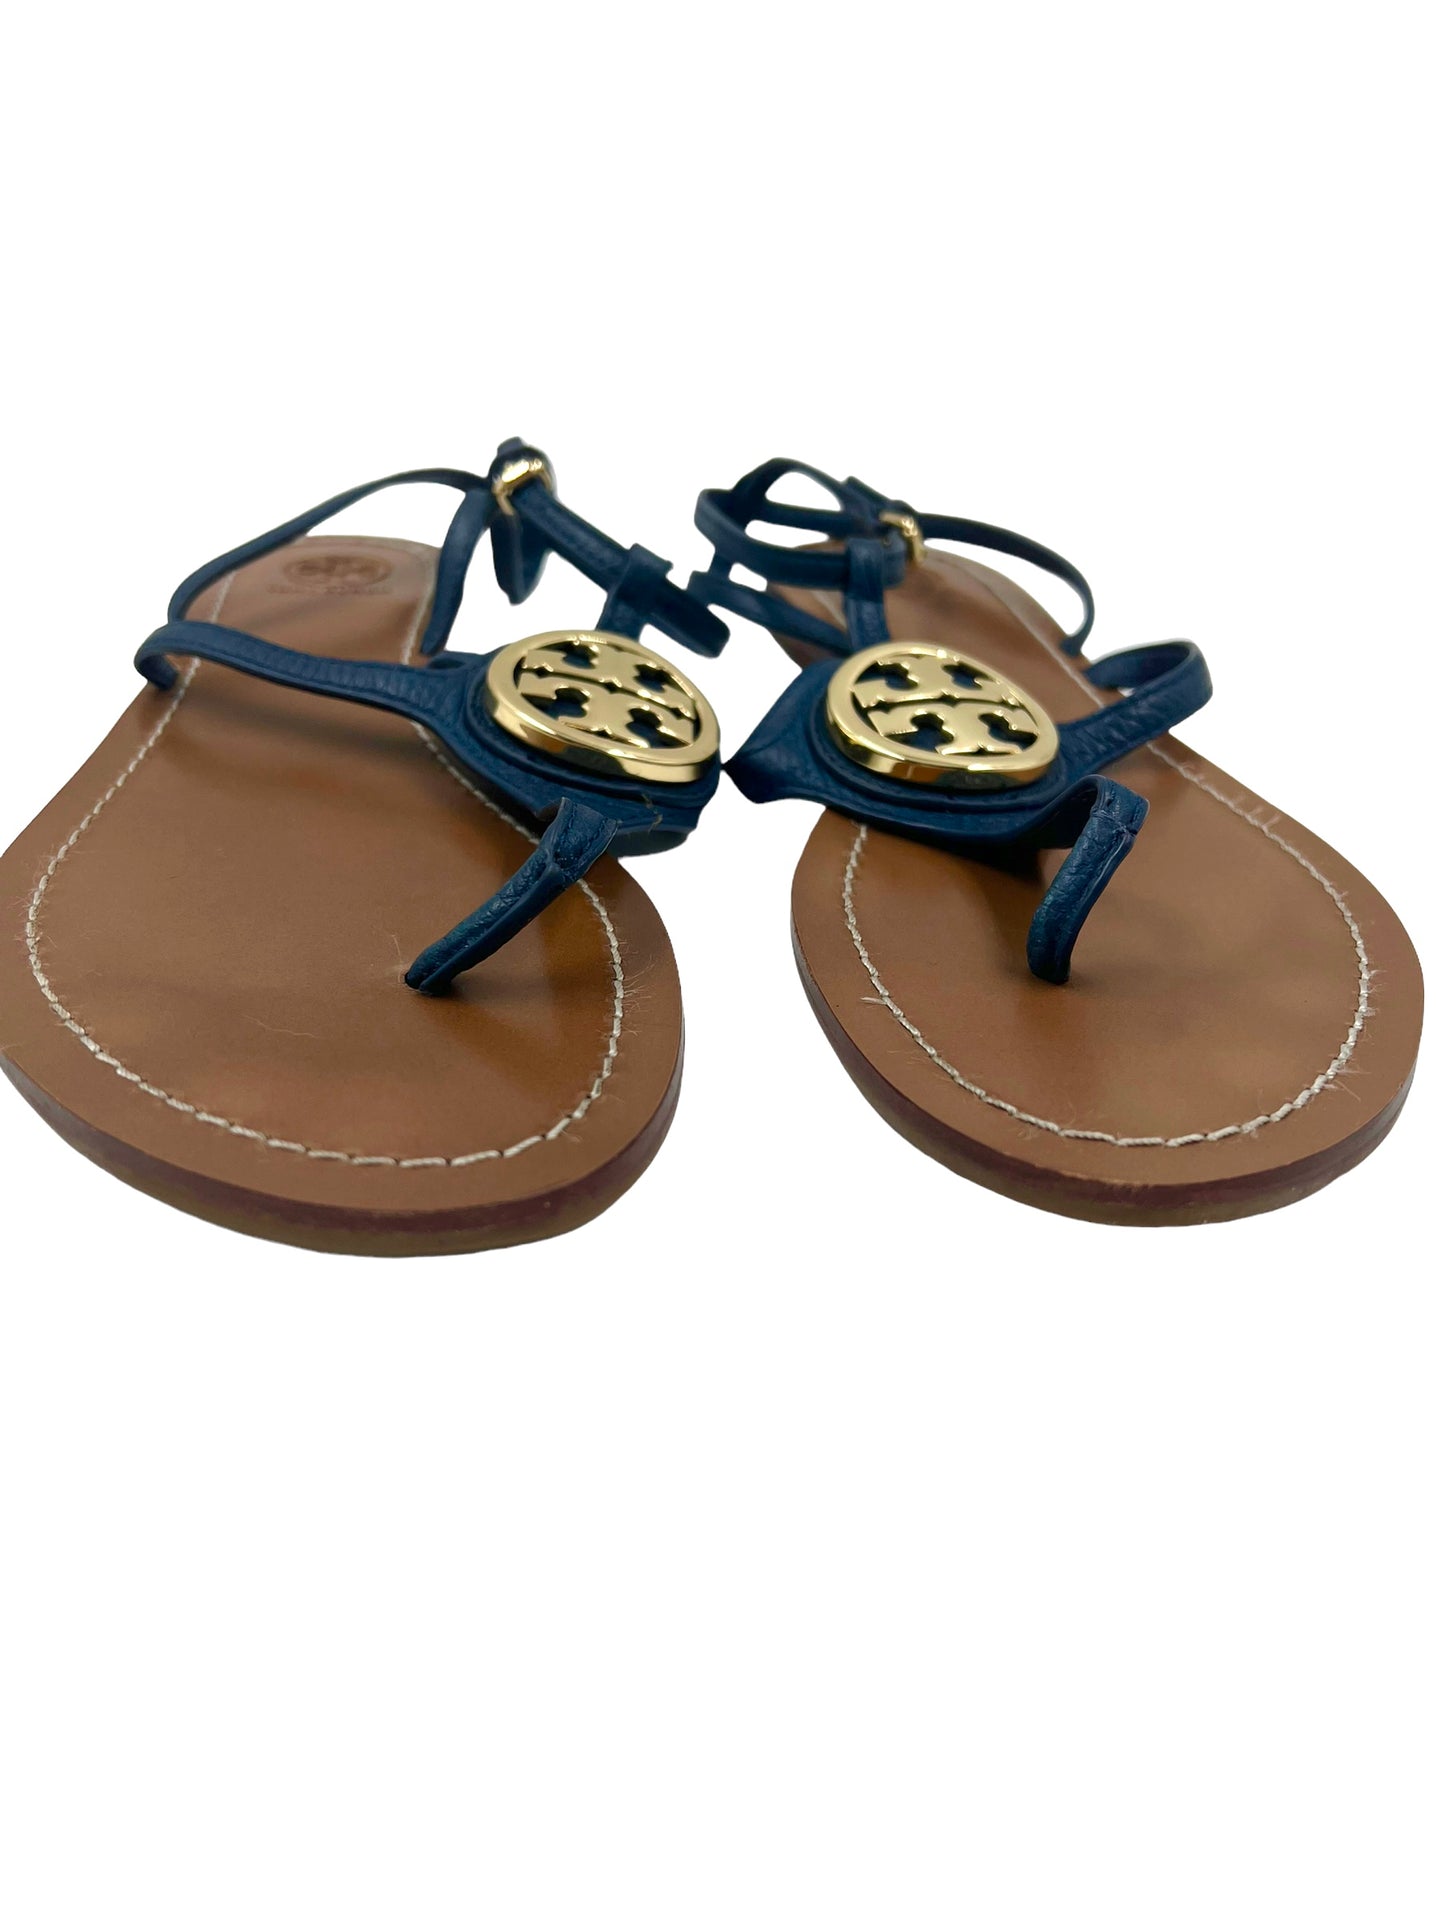 Tory Burch Blue Leather Size 10 'Miller' Sandals